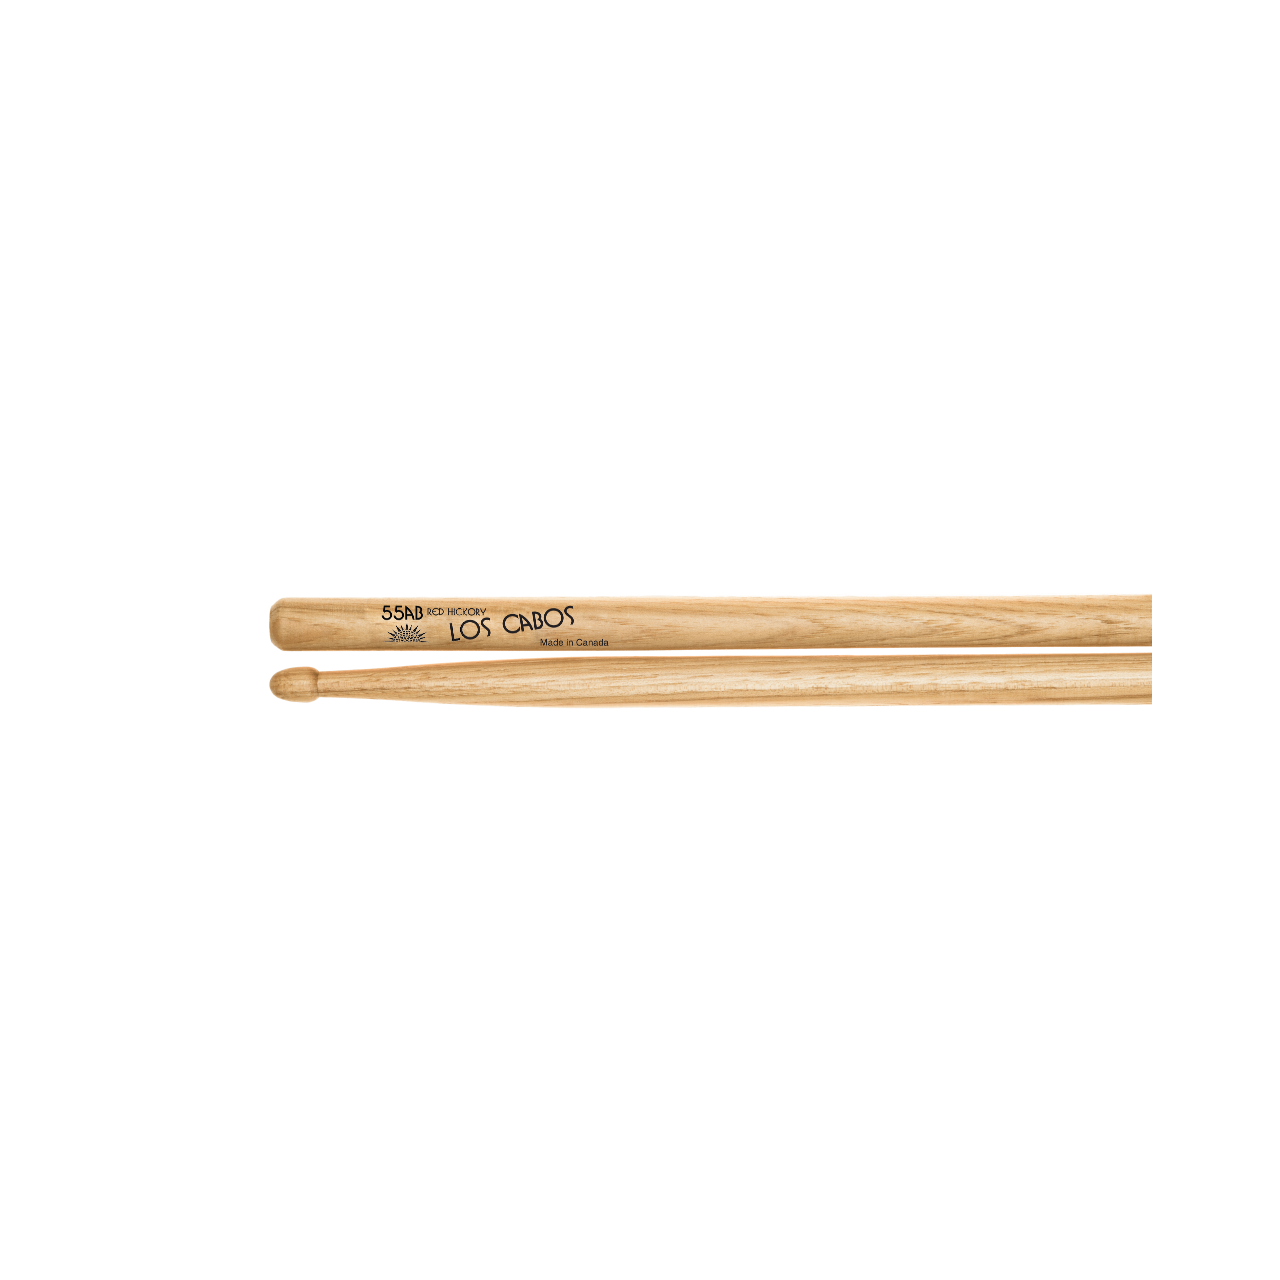 Los Cabos Drumstick 55AB Red Hickory